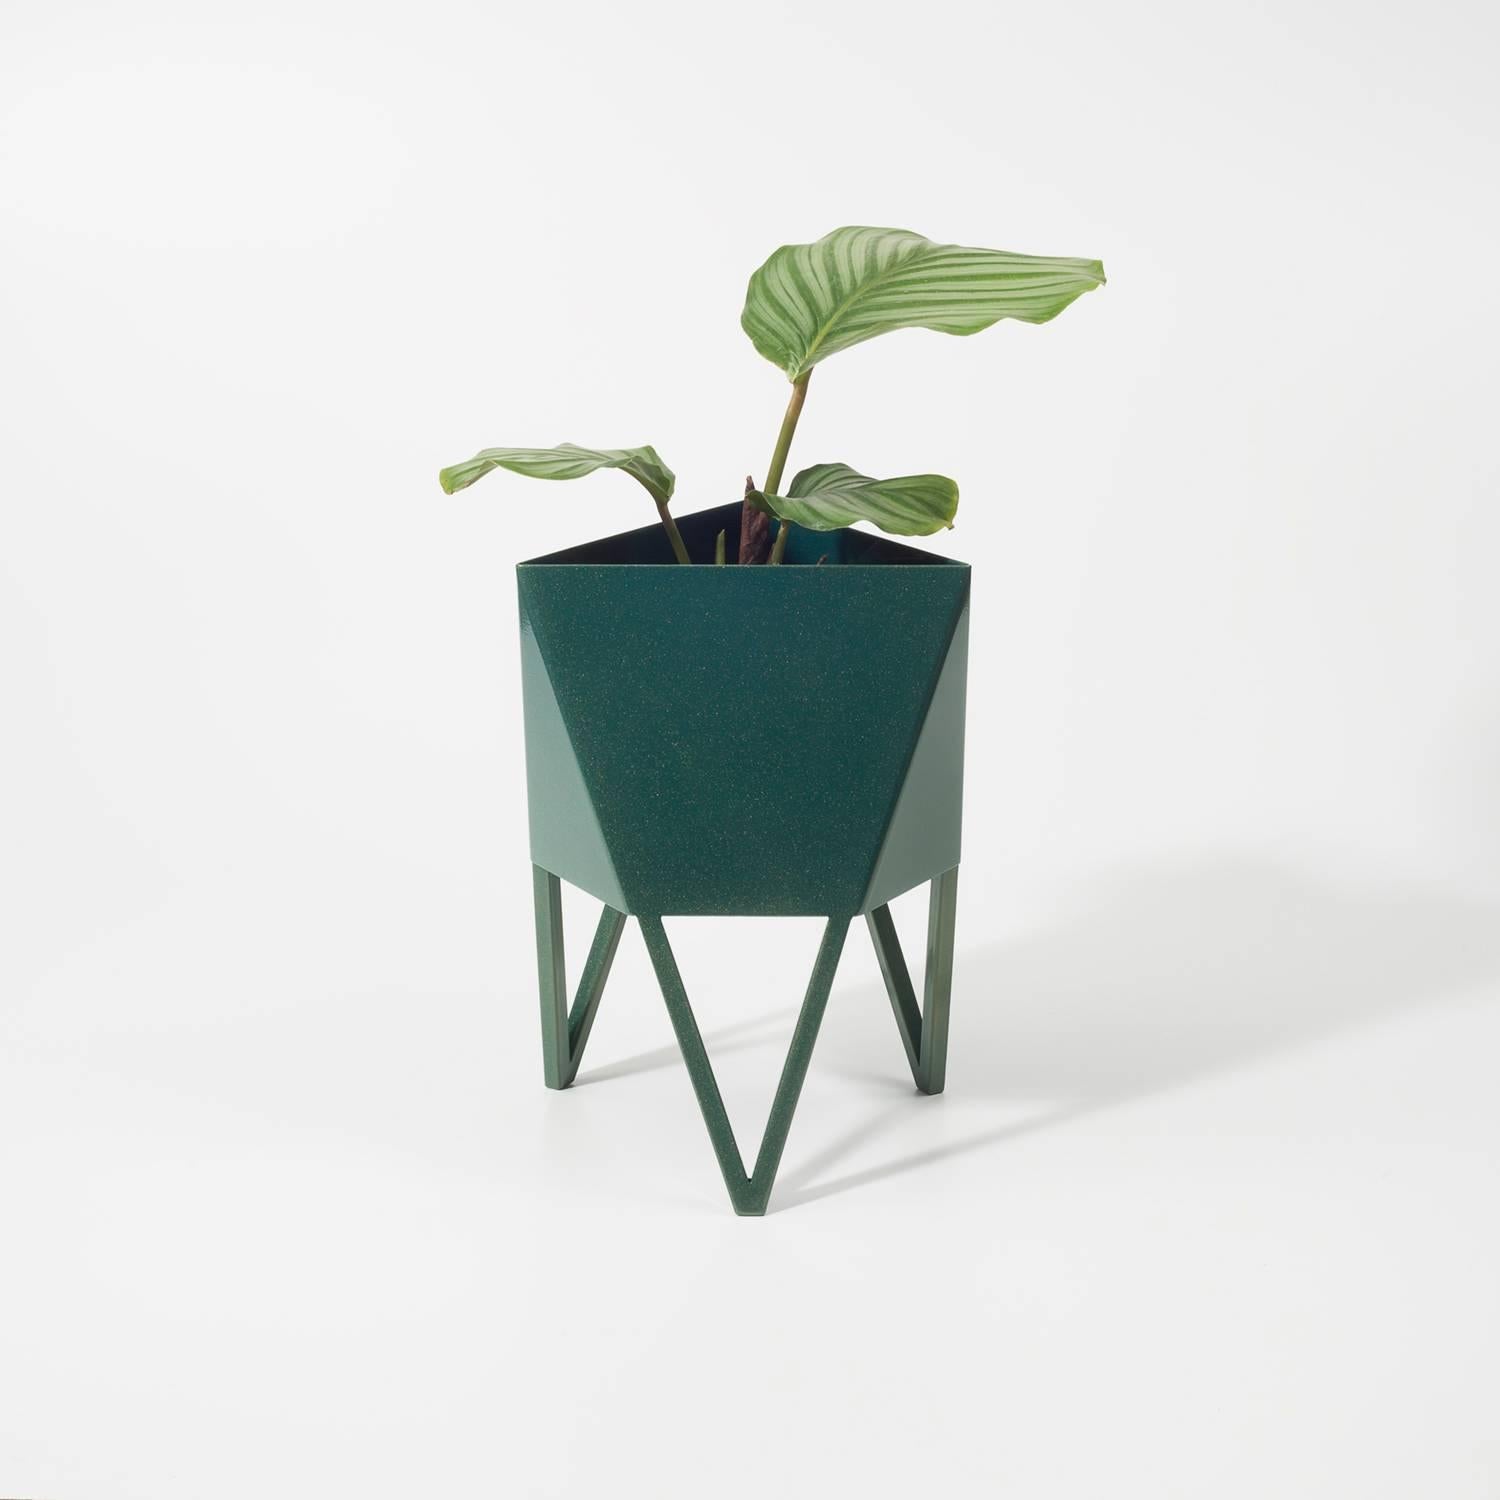 Deca Planter in Living Coral Steel, Medium, by Force/Collide 2